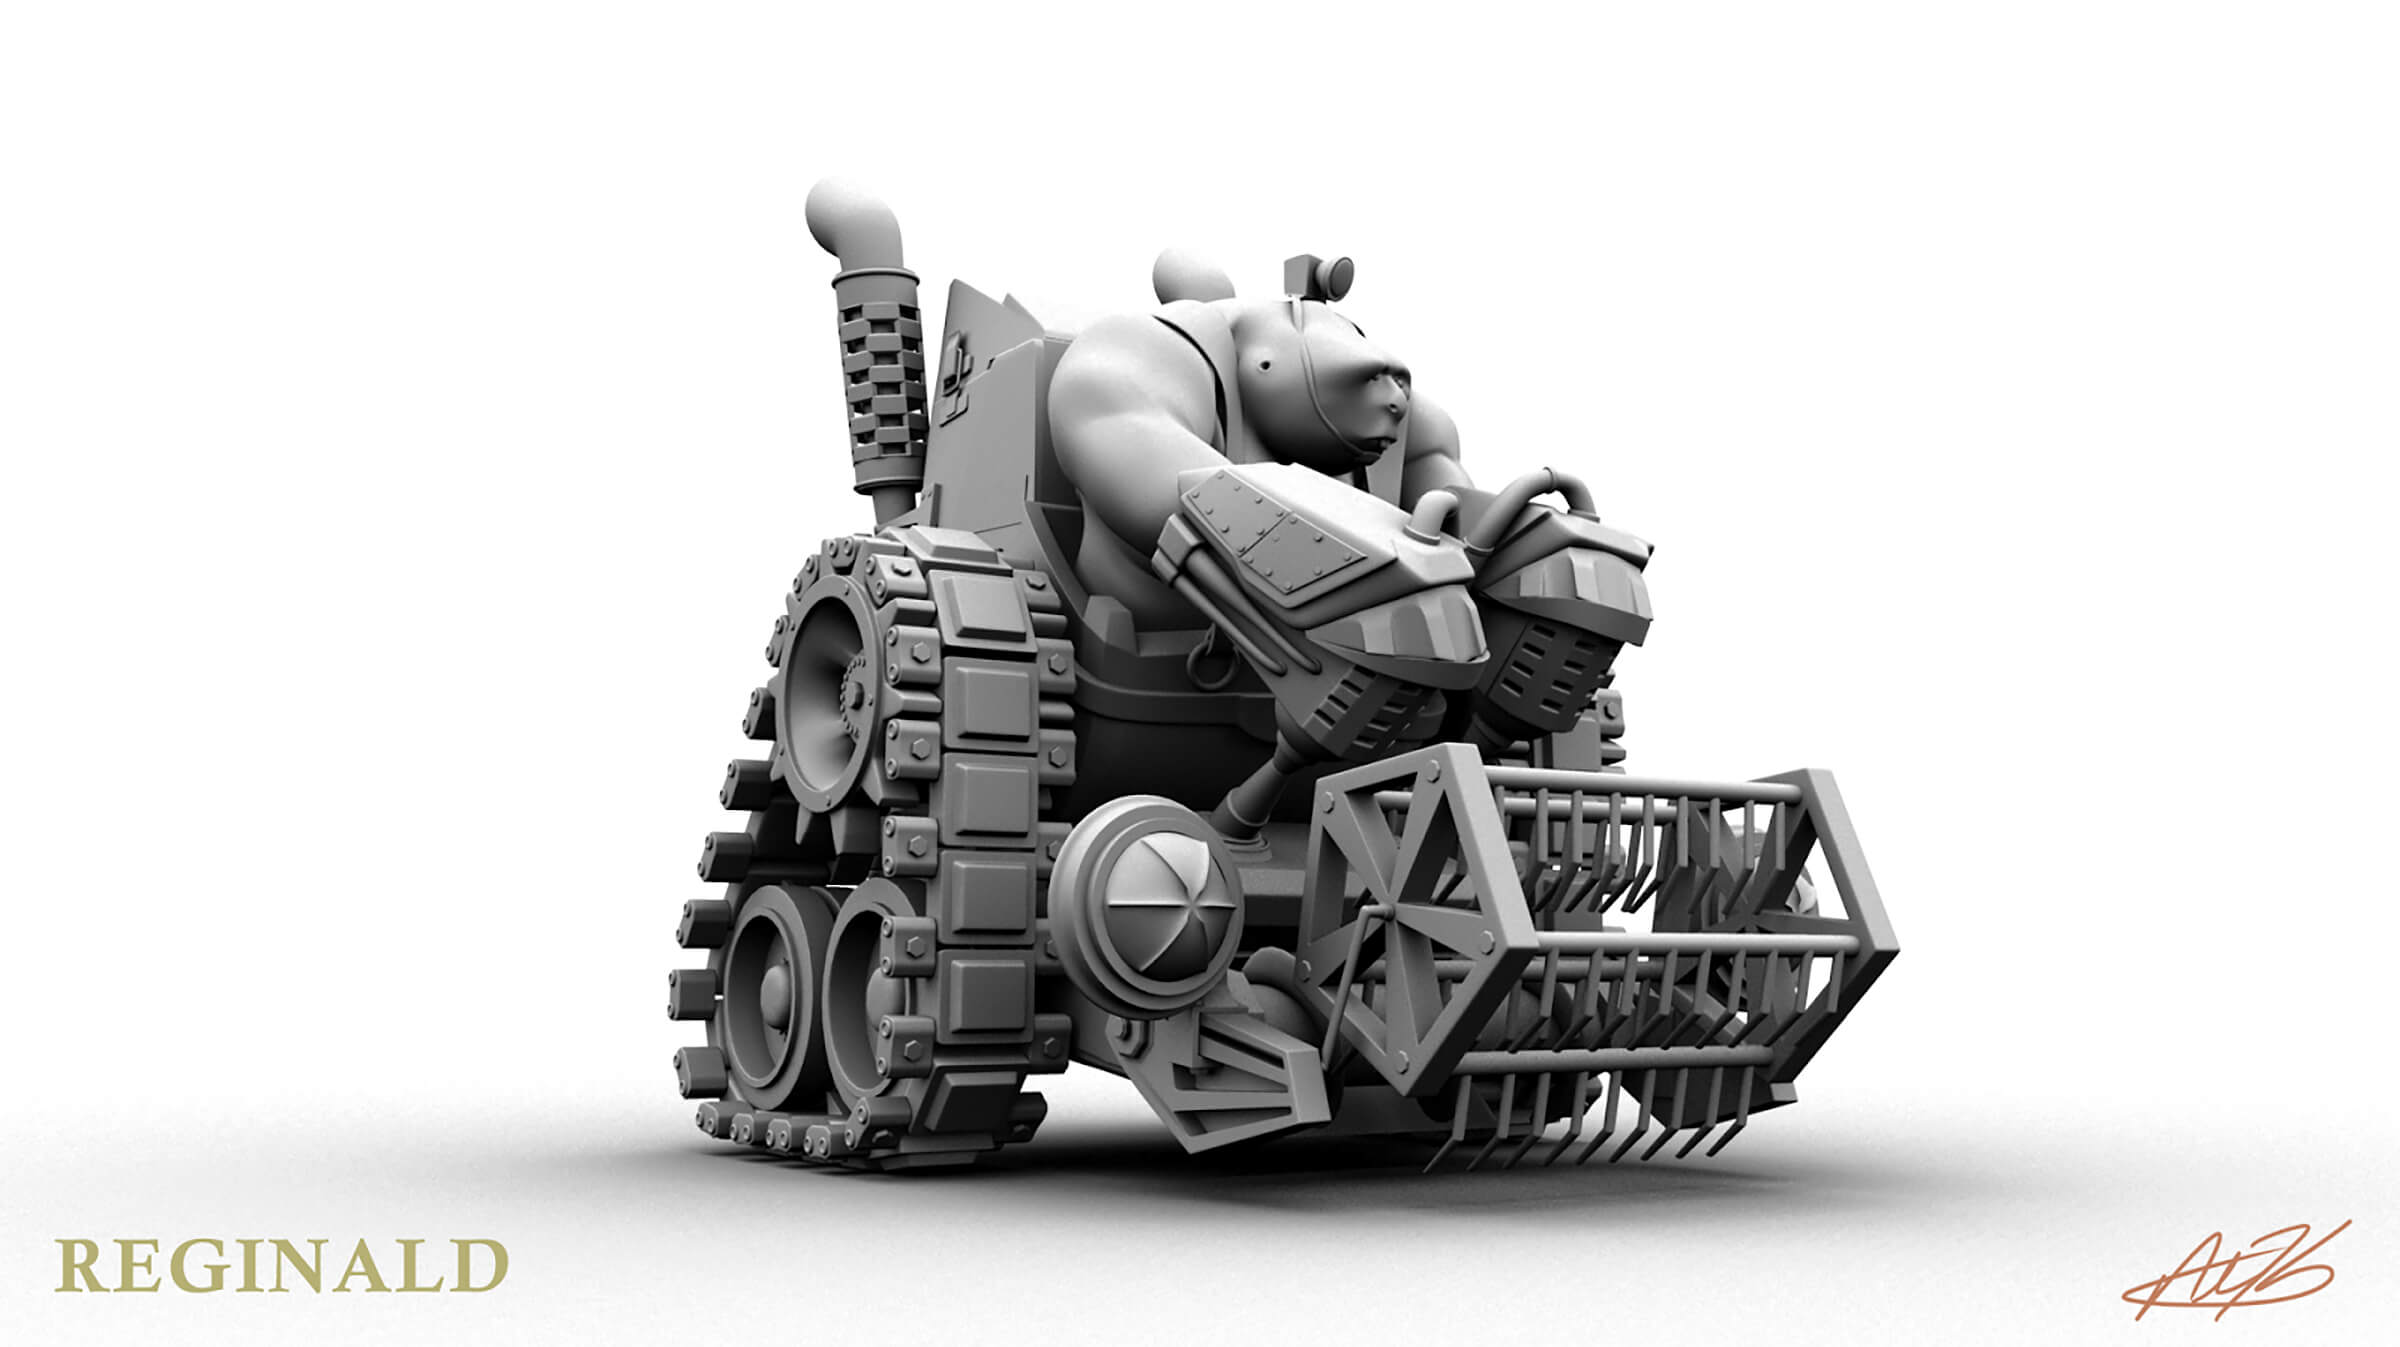 computer-generated 3D model of a muscular male character sitting in a tank-like vehicle